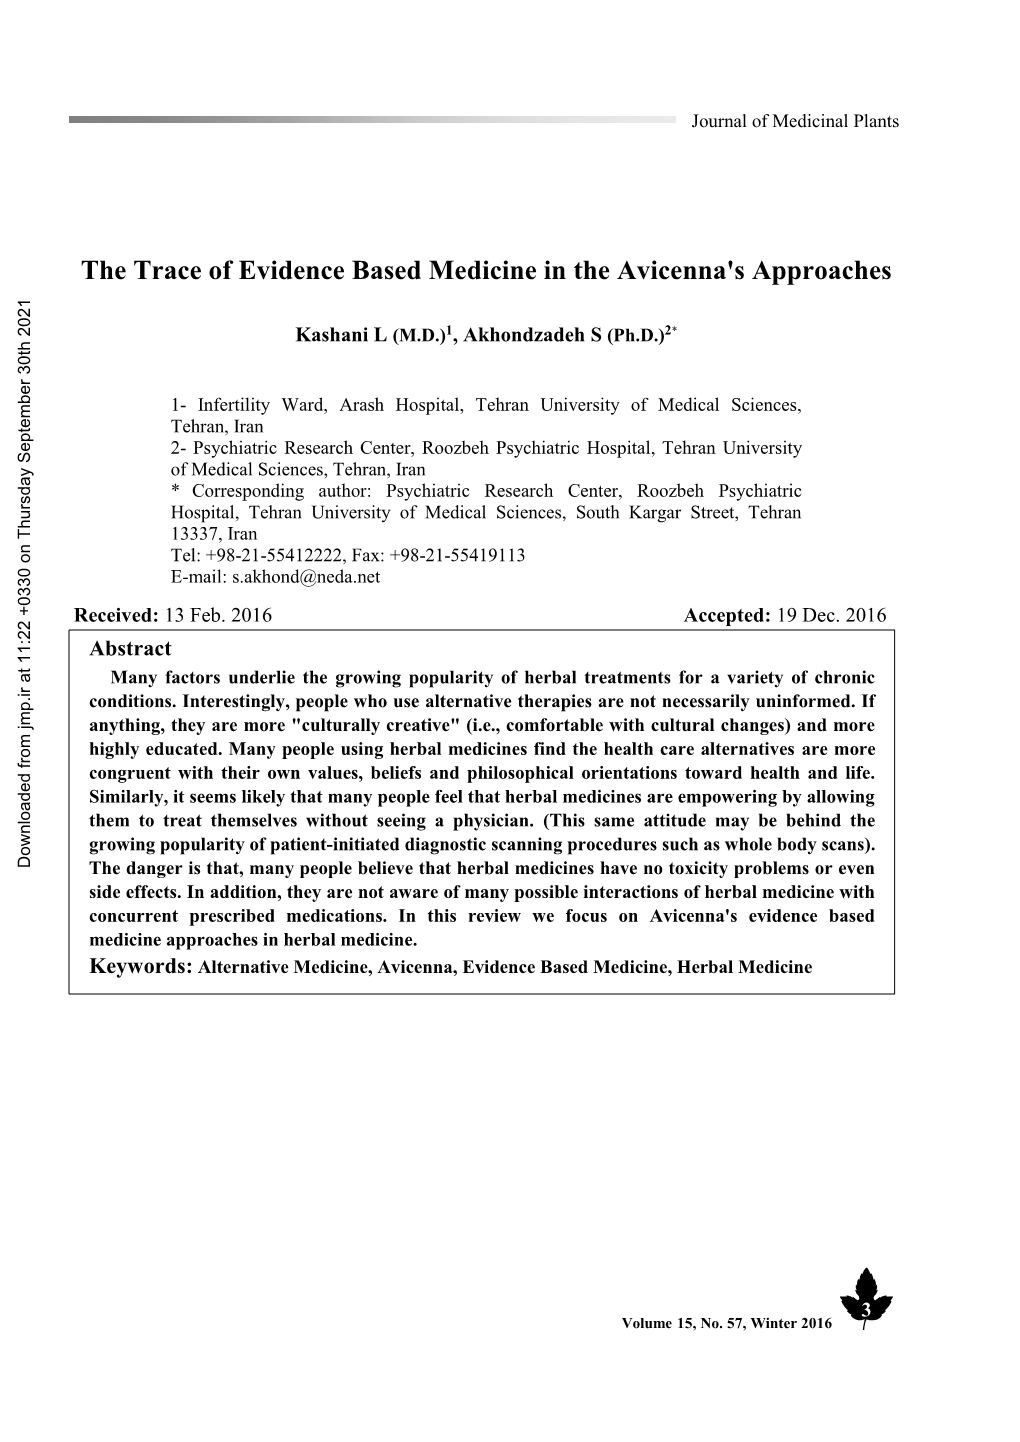 The Trace of Evidence Based Medicine in Avicenna's Approaches